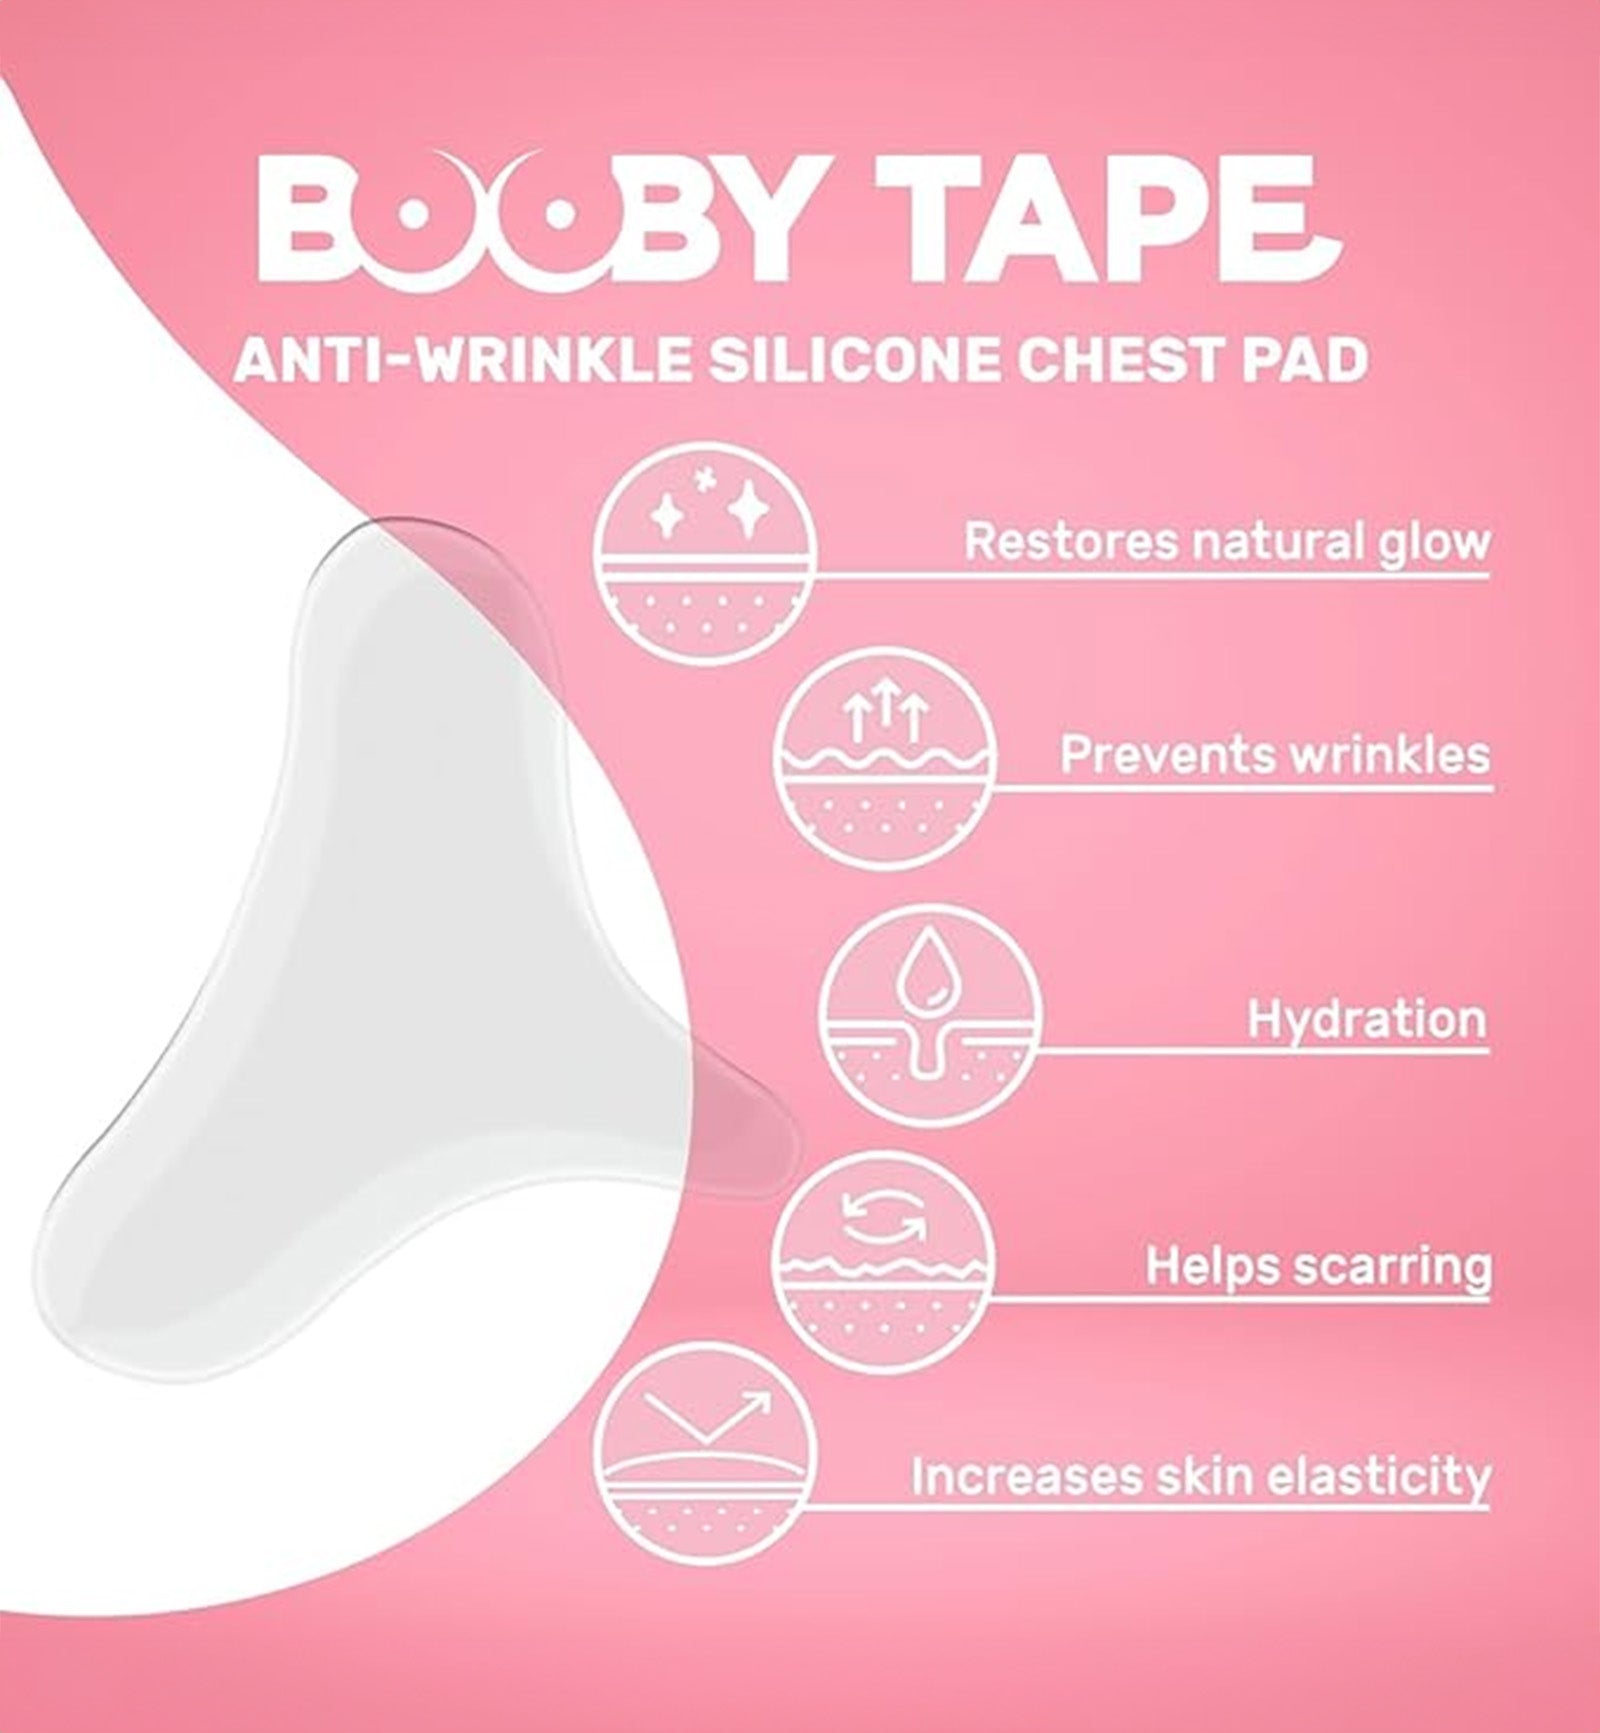 Booby Tape Anti-Wrinkle Silicone Chest Pad